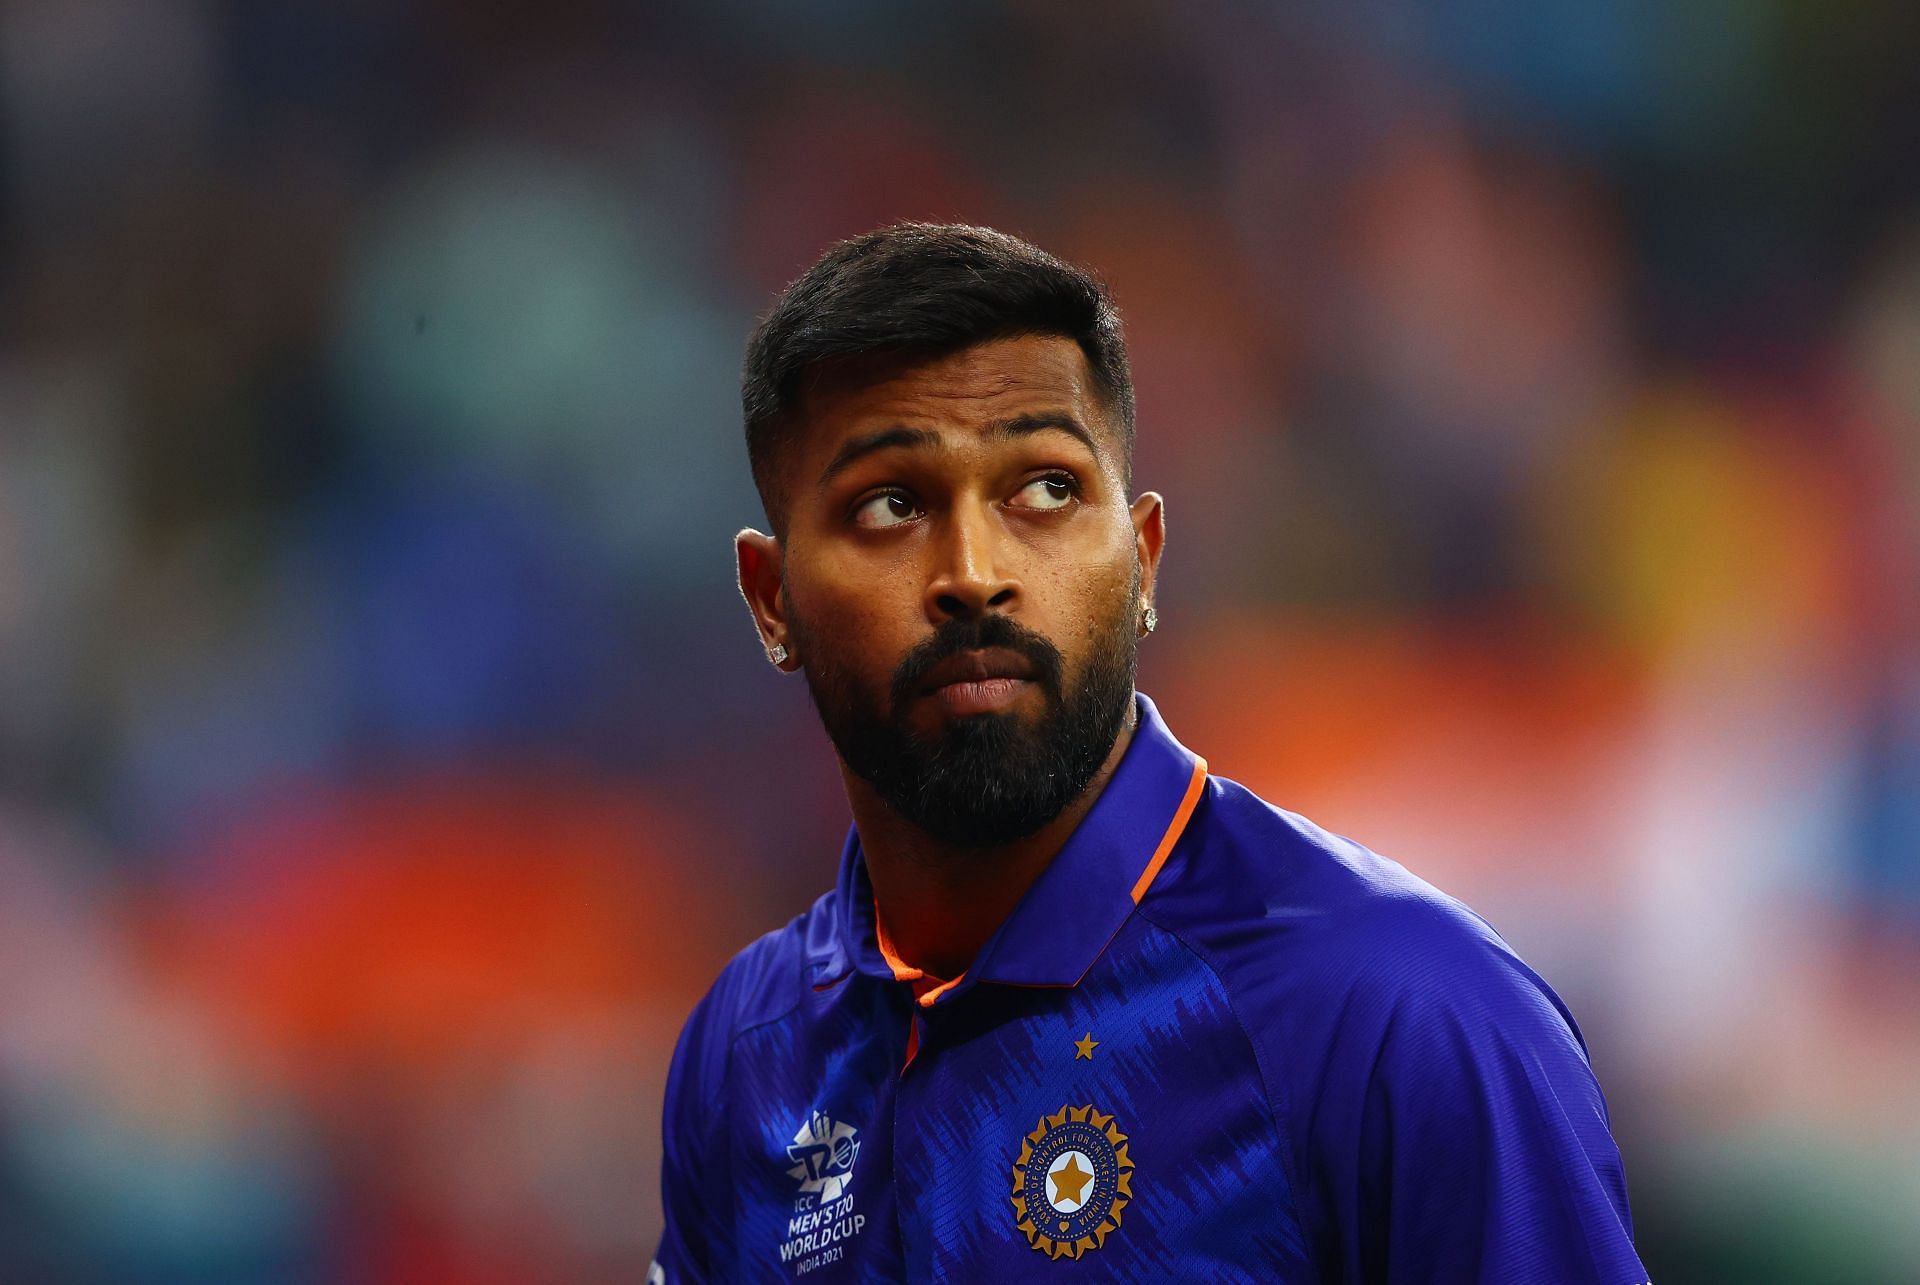 Hardik Pandya played for India in the ICC T20 World Cup 2021